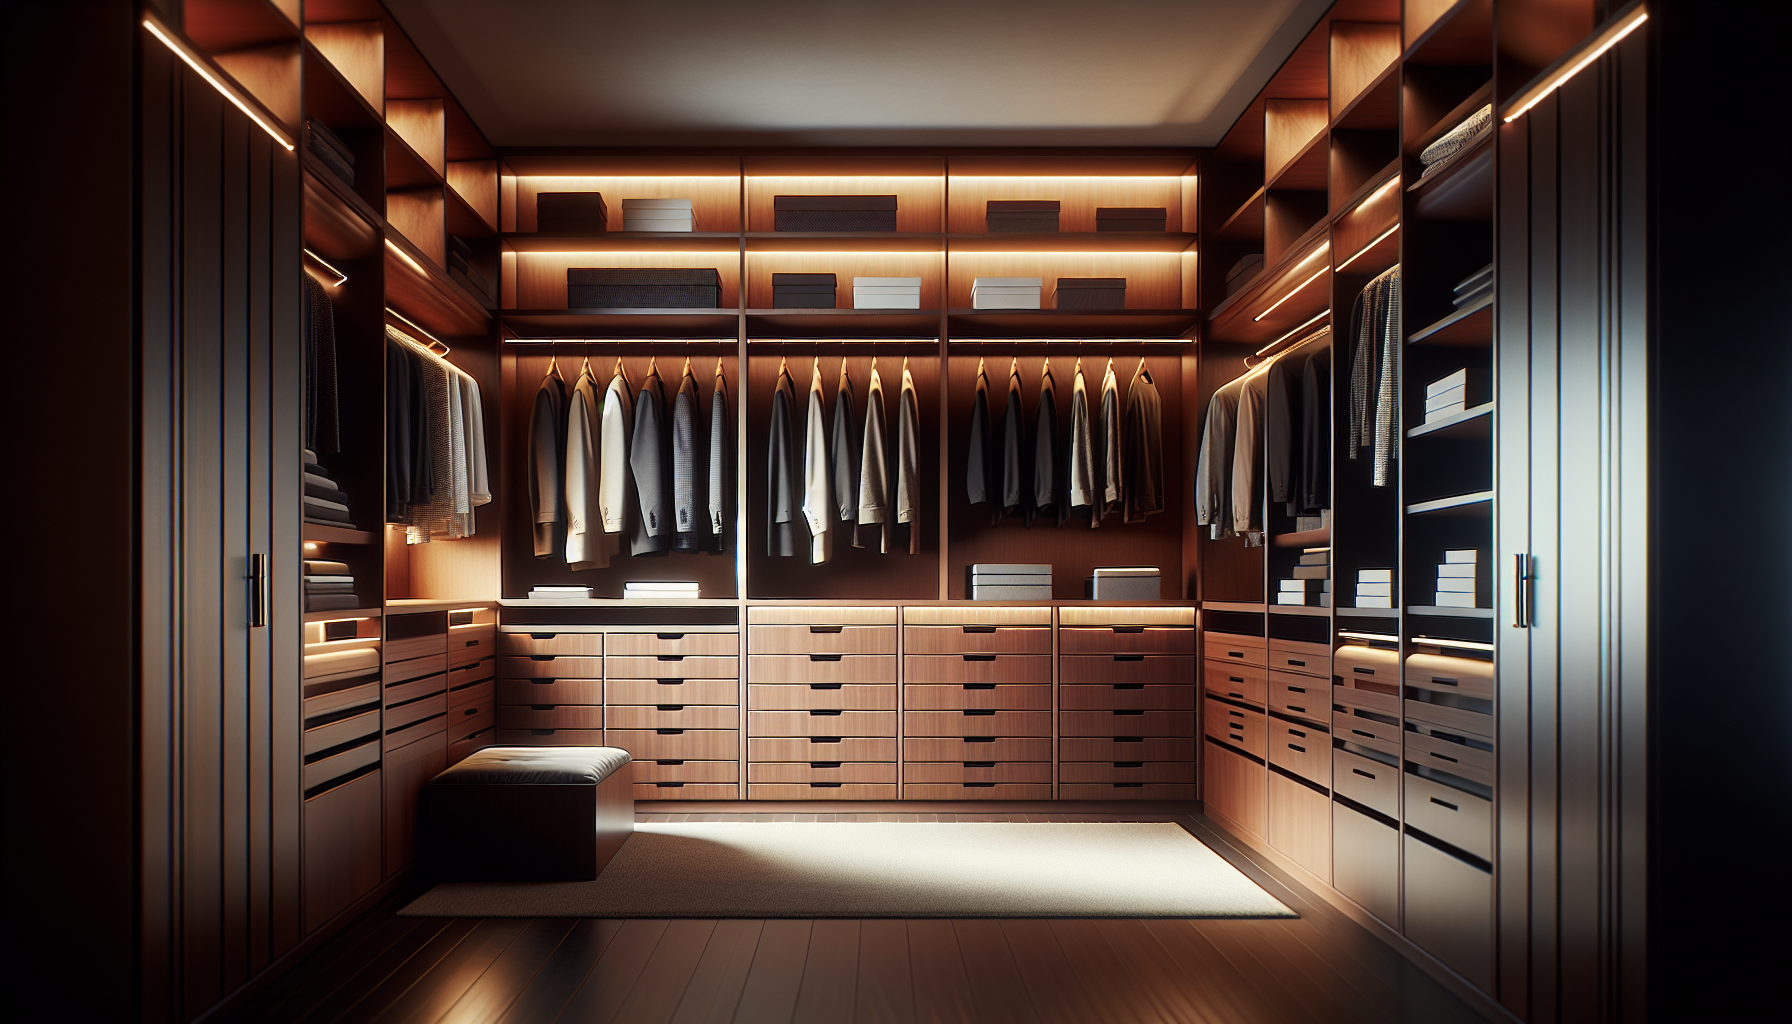 Maximized wall-to-wall storage solutions in a walk-in closet